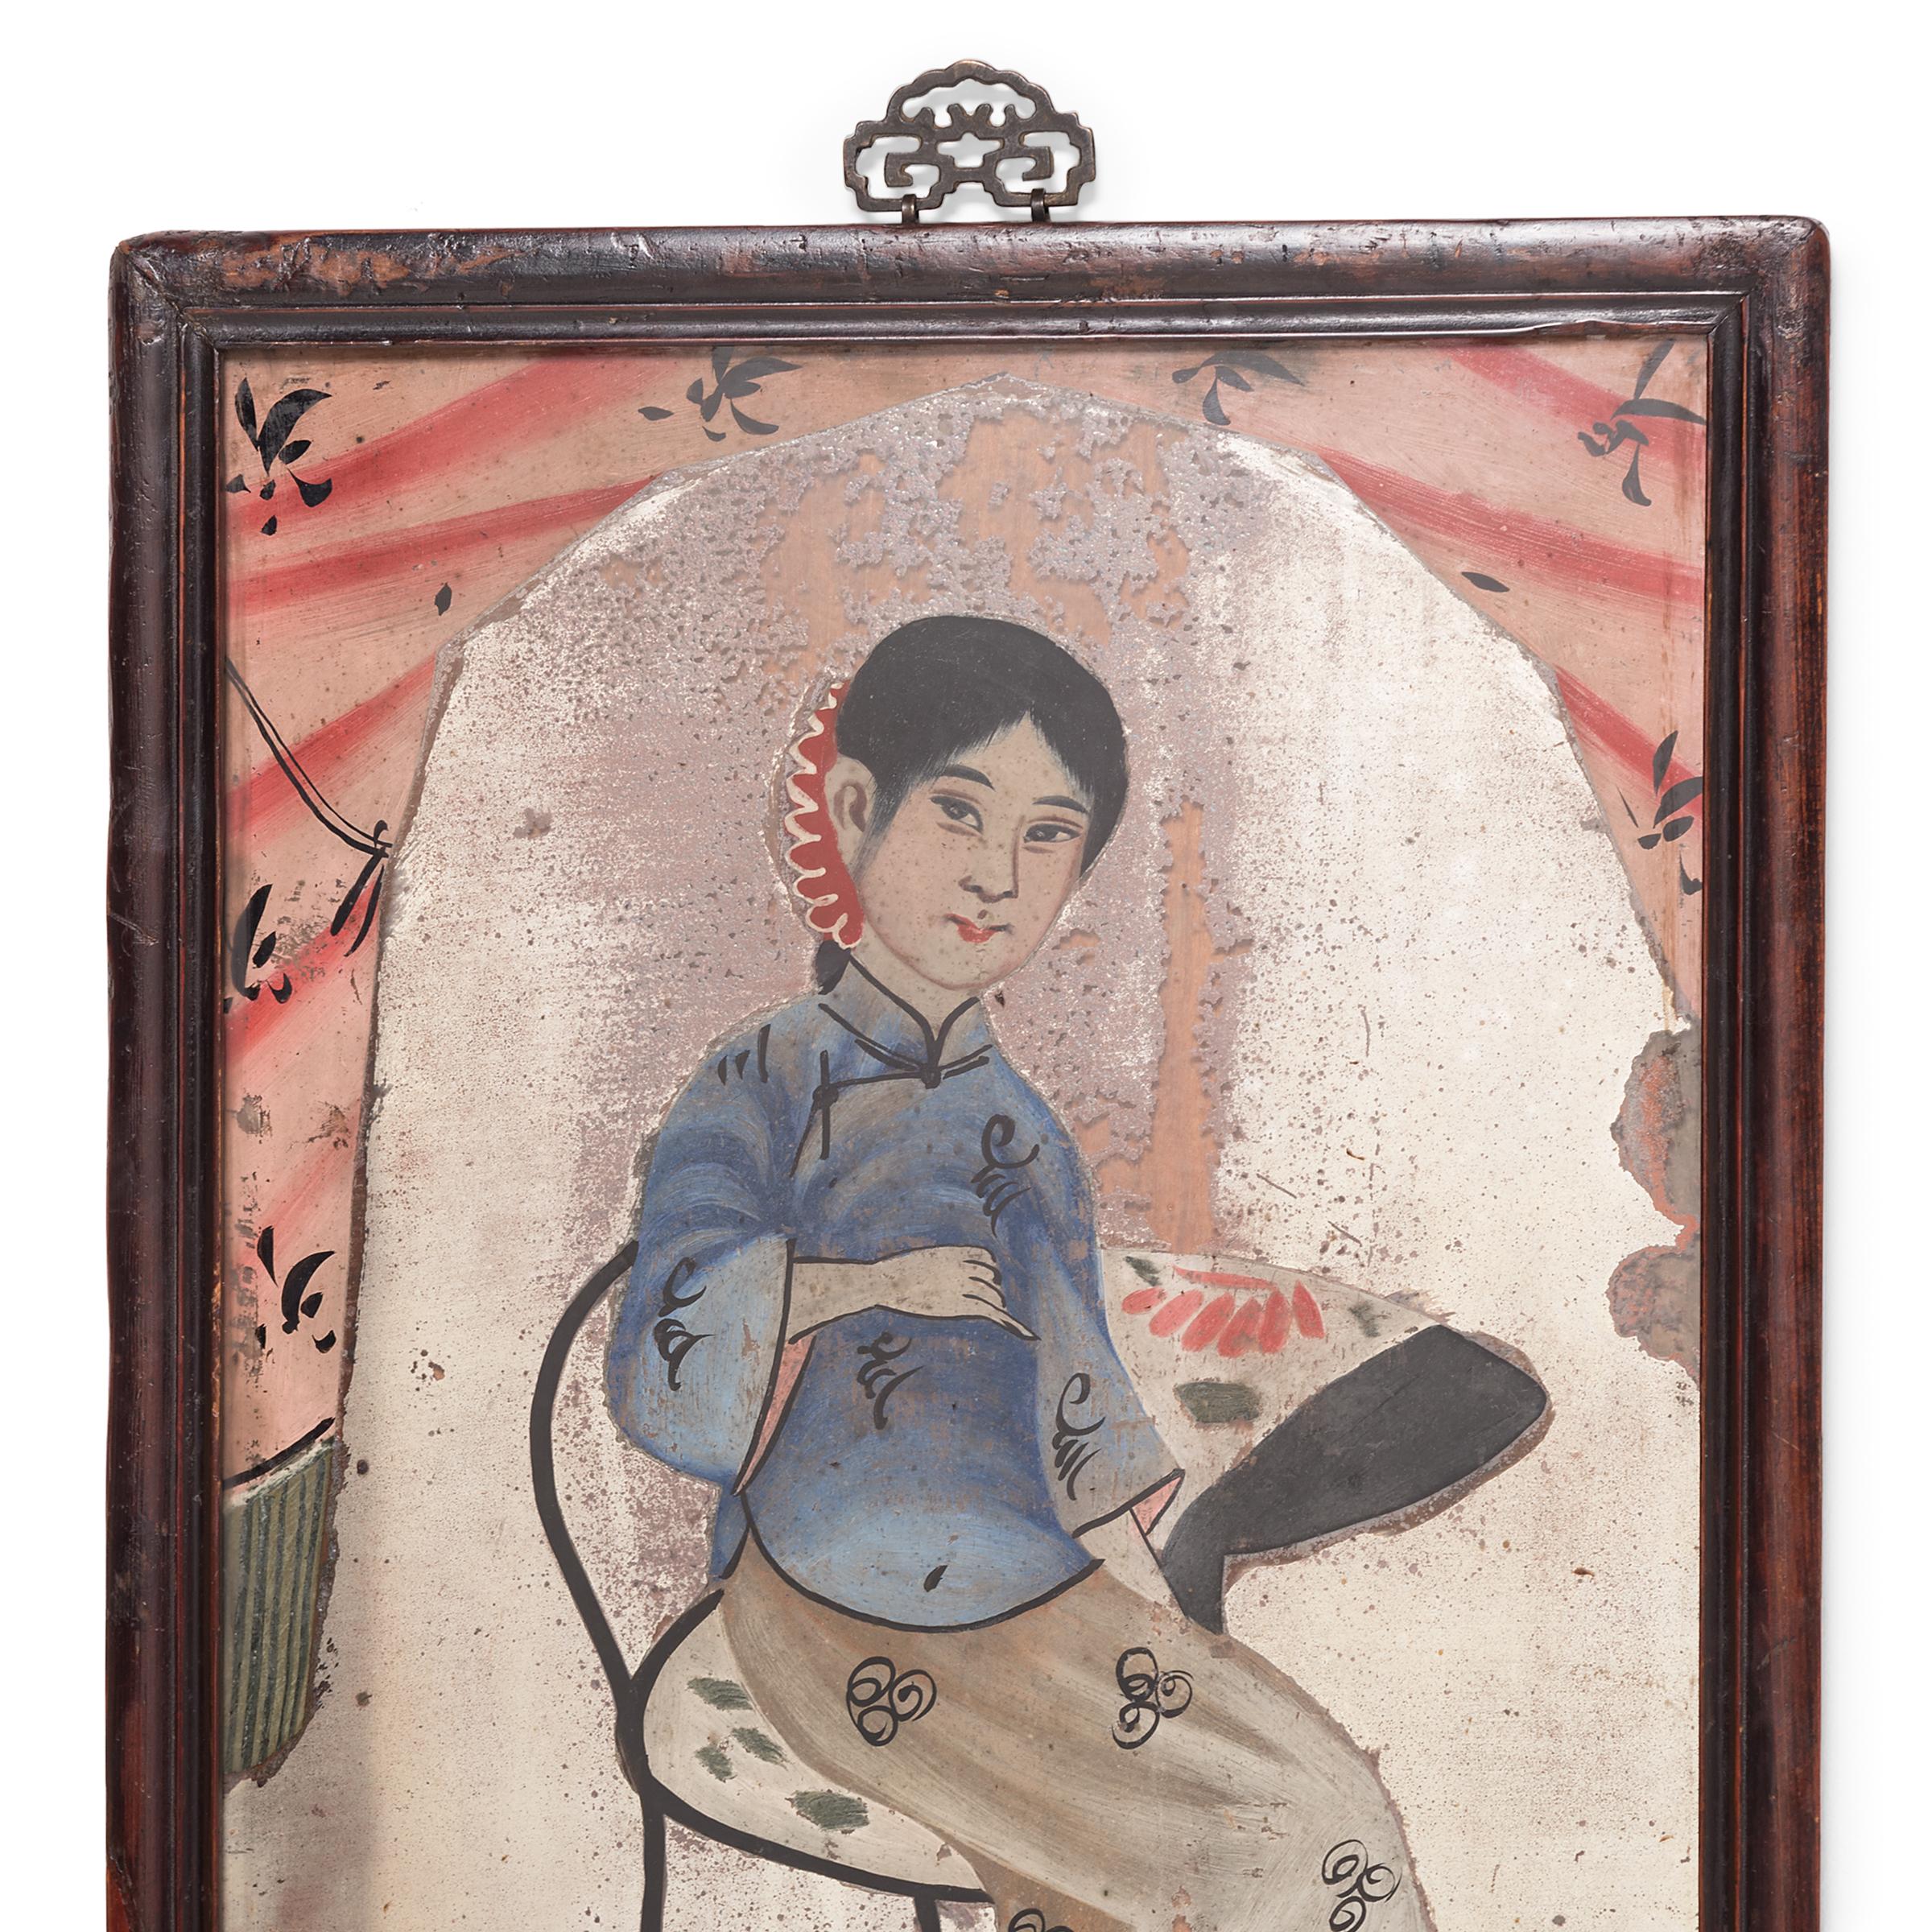 With its sparkling color and Folk Art appeal, this portrait painting from circa 1900 makes a delightful accent to a bedroom or study. This portrait painting of a young woman is an example of reverse glass painting, in which an artist applies paint